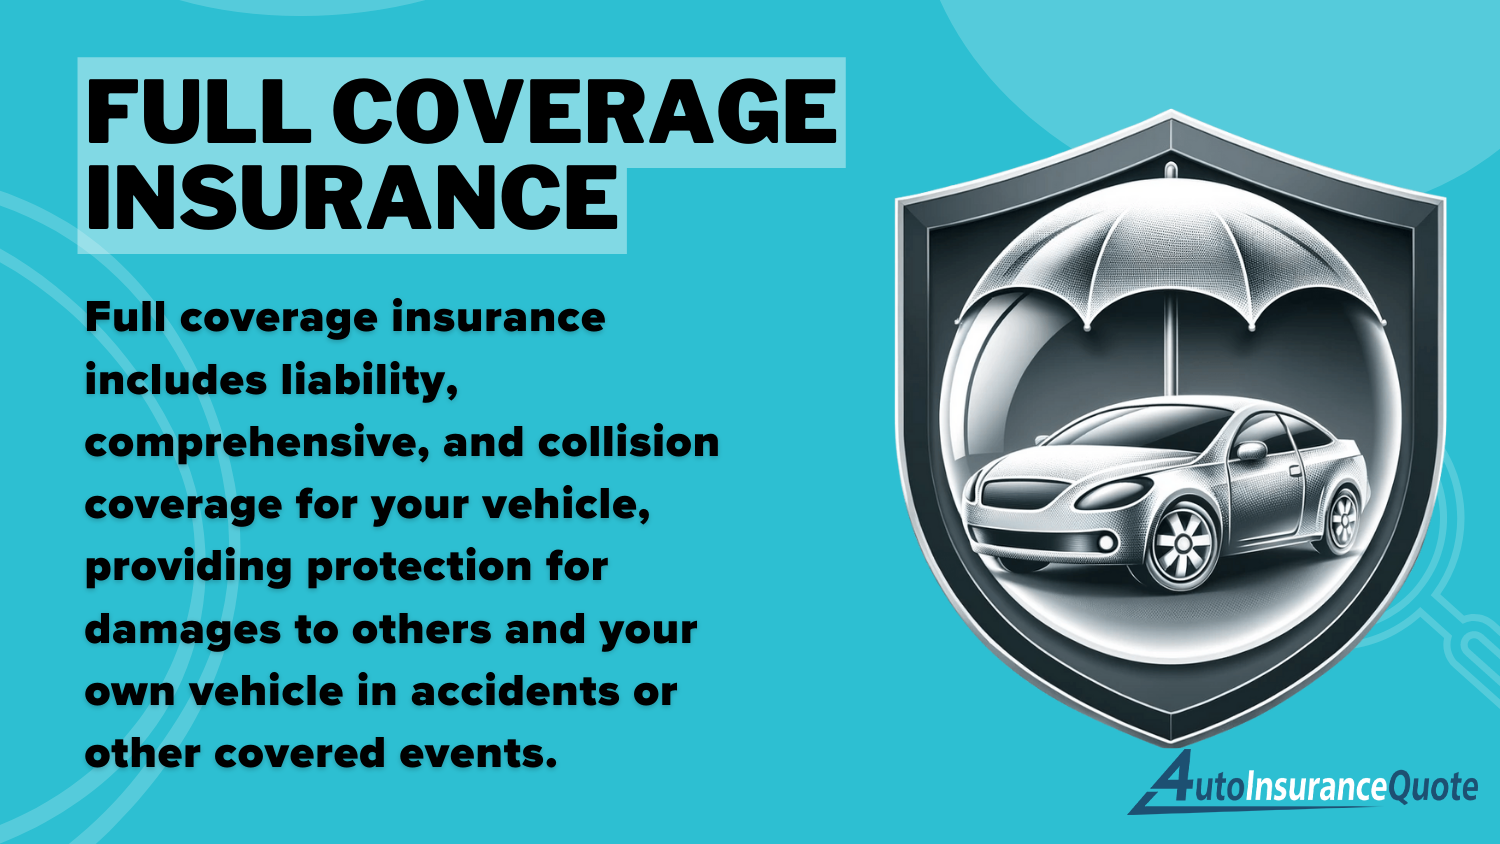 Does auto insurance cover damage from fallen power line?: Full Coverage Insurance Definition Card